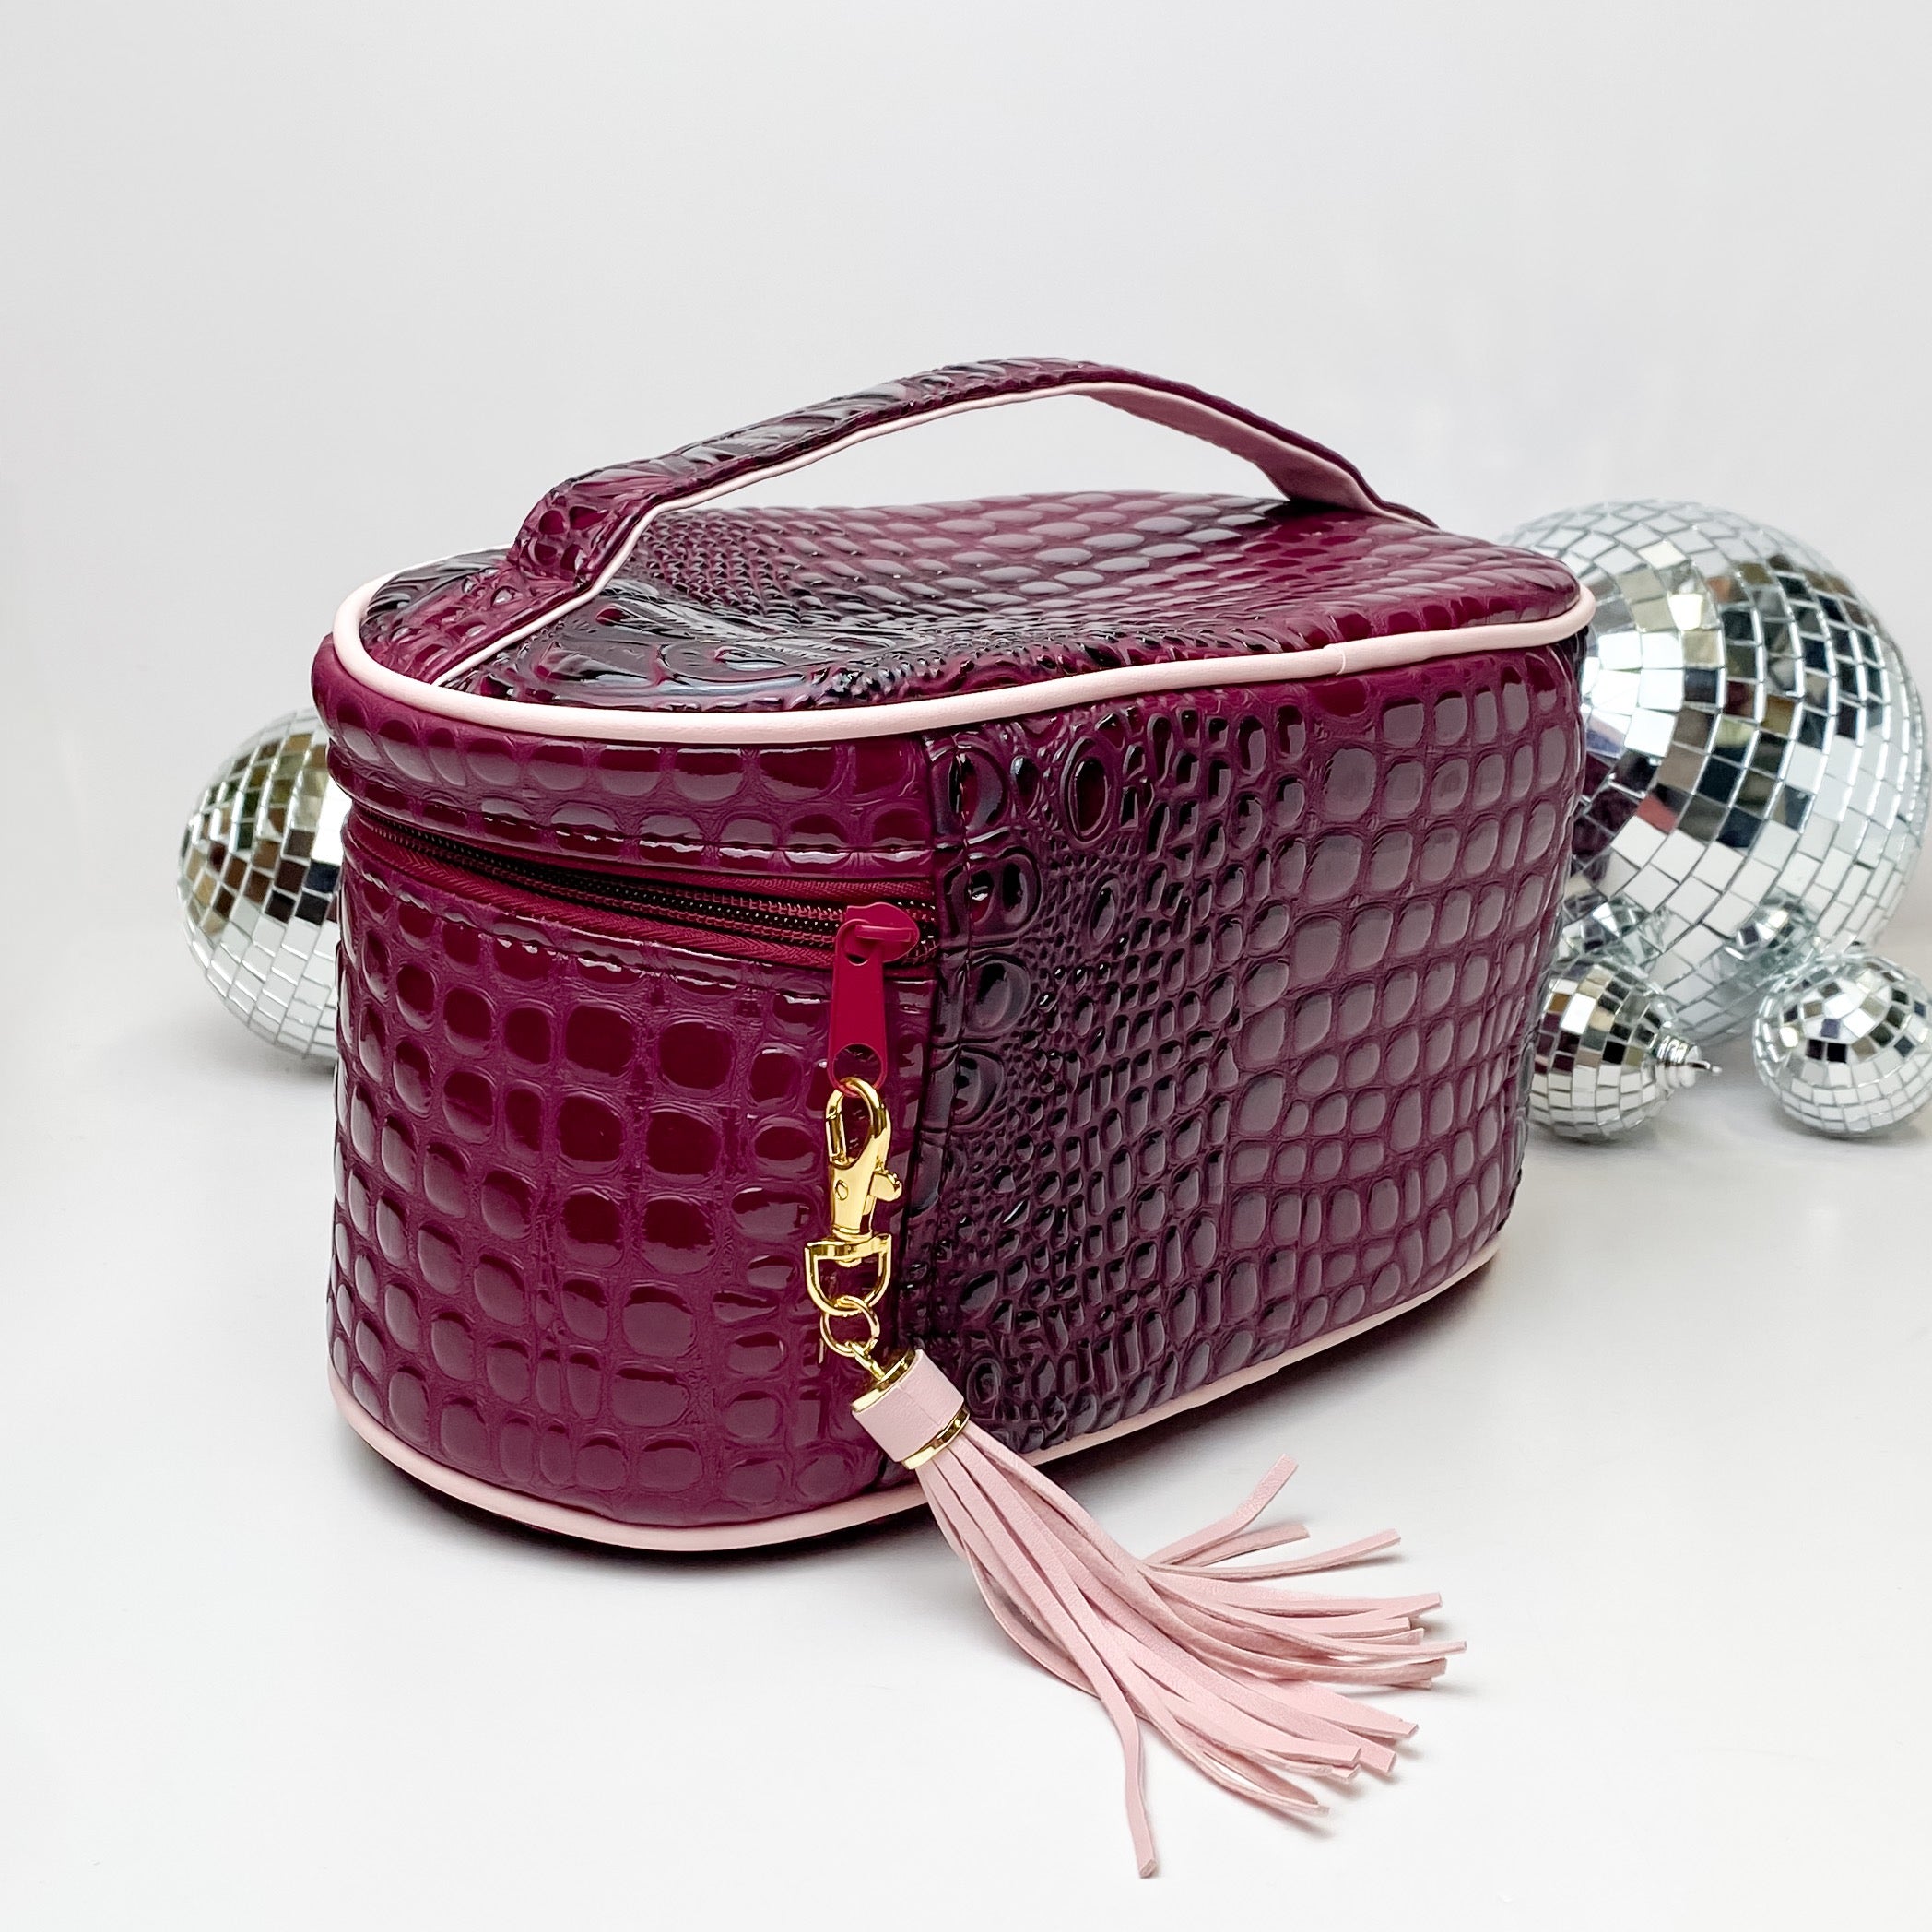 Makeup Junkie | Medium Bubble Gator Print Train Case in Maroon - Giddy Up Glamour Boutique